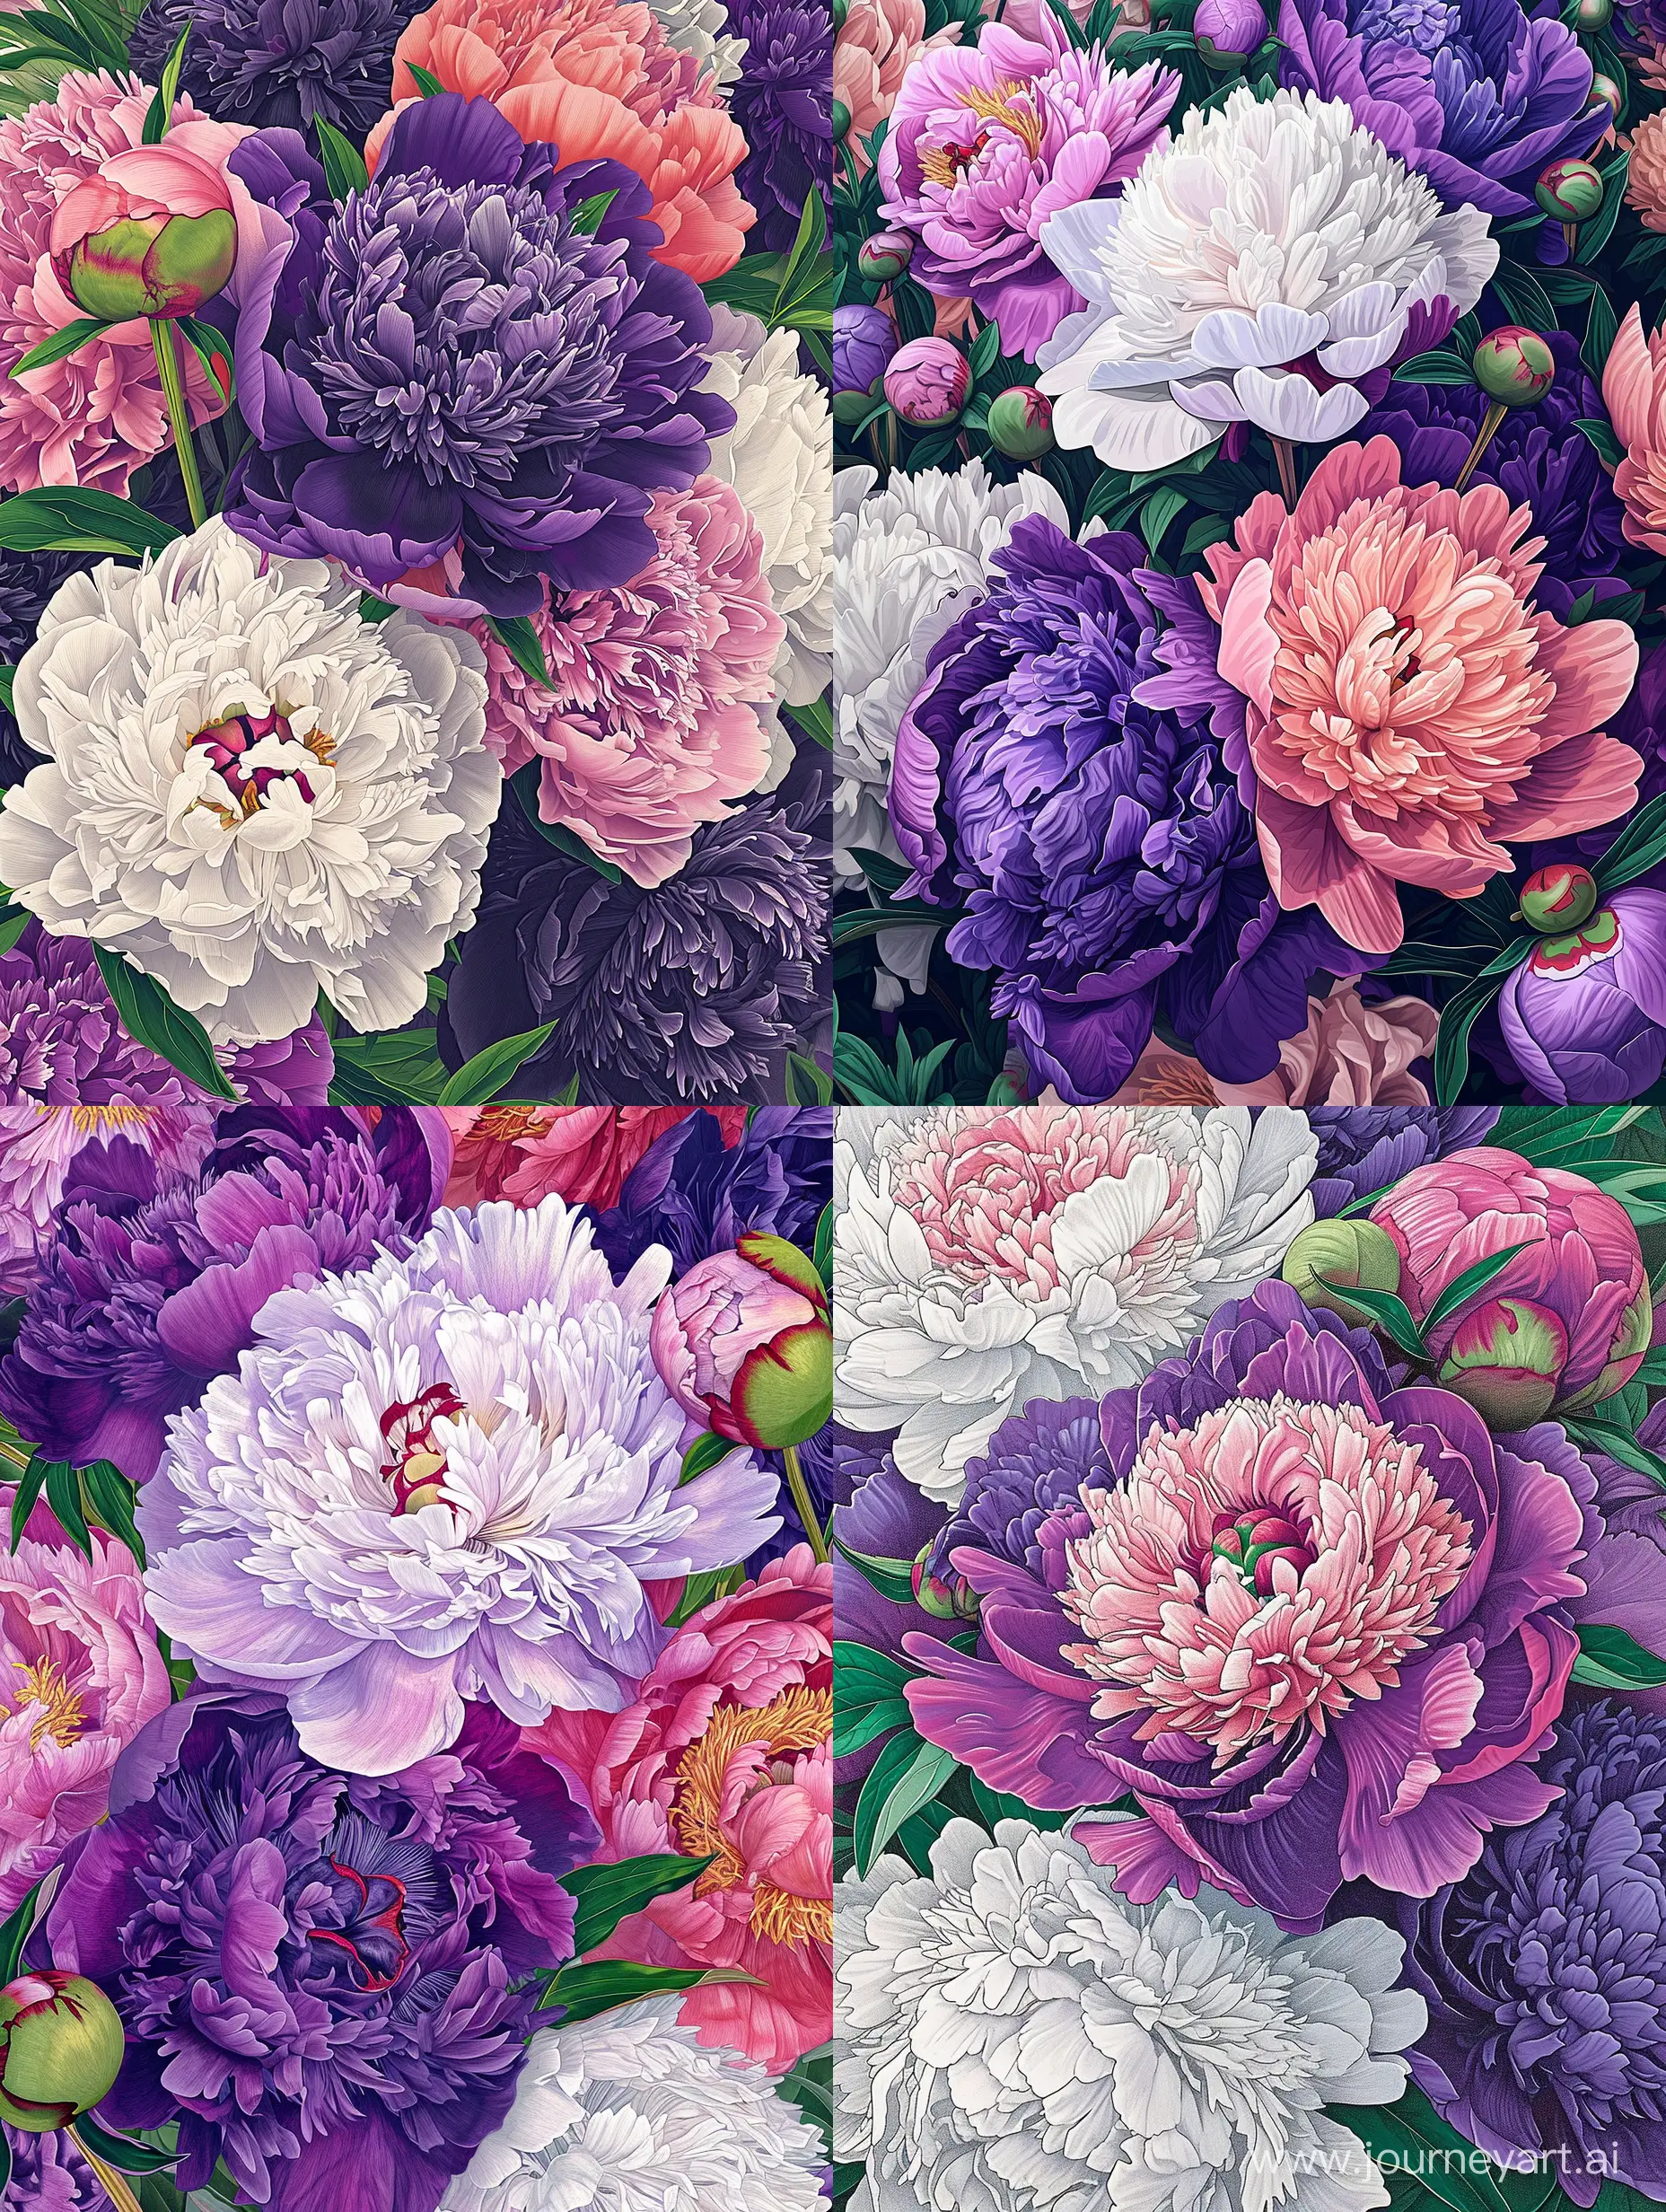 a vibrant and lively Risograph of peonies in full bloom. Highly intricate detailing, texture detail, 8k, The medium should be hyper-realistic drawing with a style reminiscent of william morris floral paintings.  The lighting should be bright and direct, highlighting the intricate details and vivid colors of the flowers. The colors should be a vibrant palette of purples, pinks, whites, and greens 